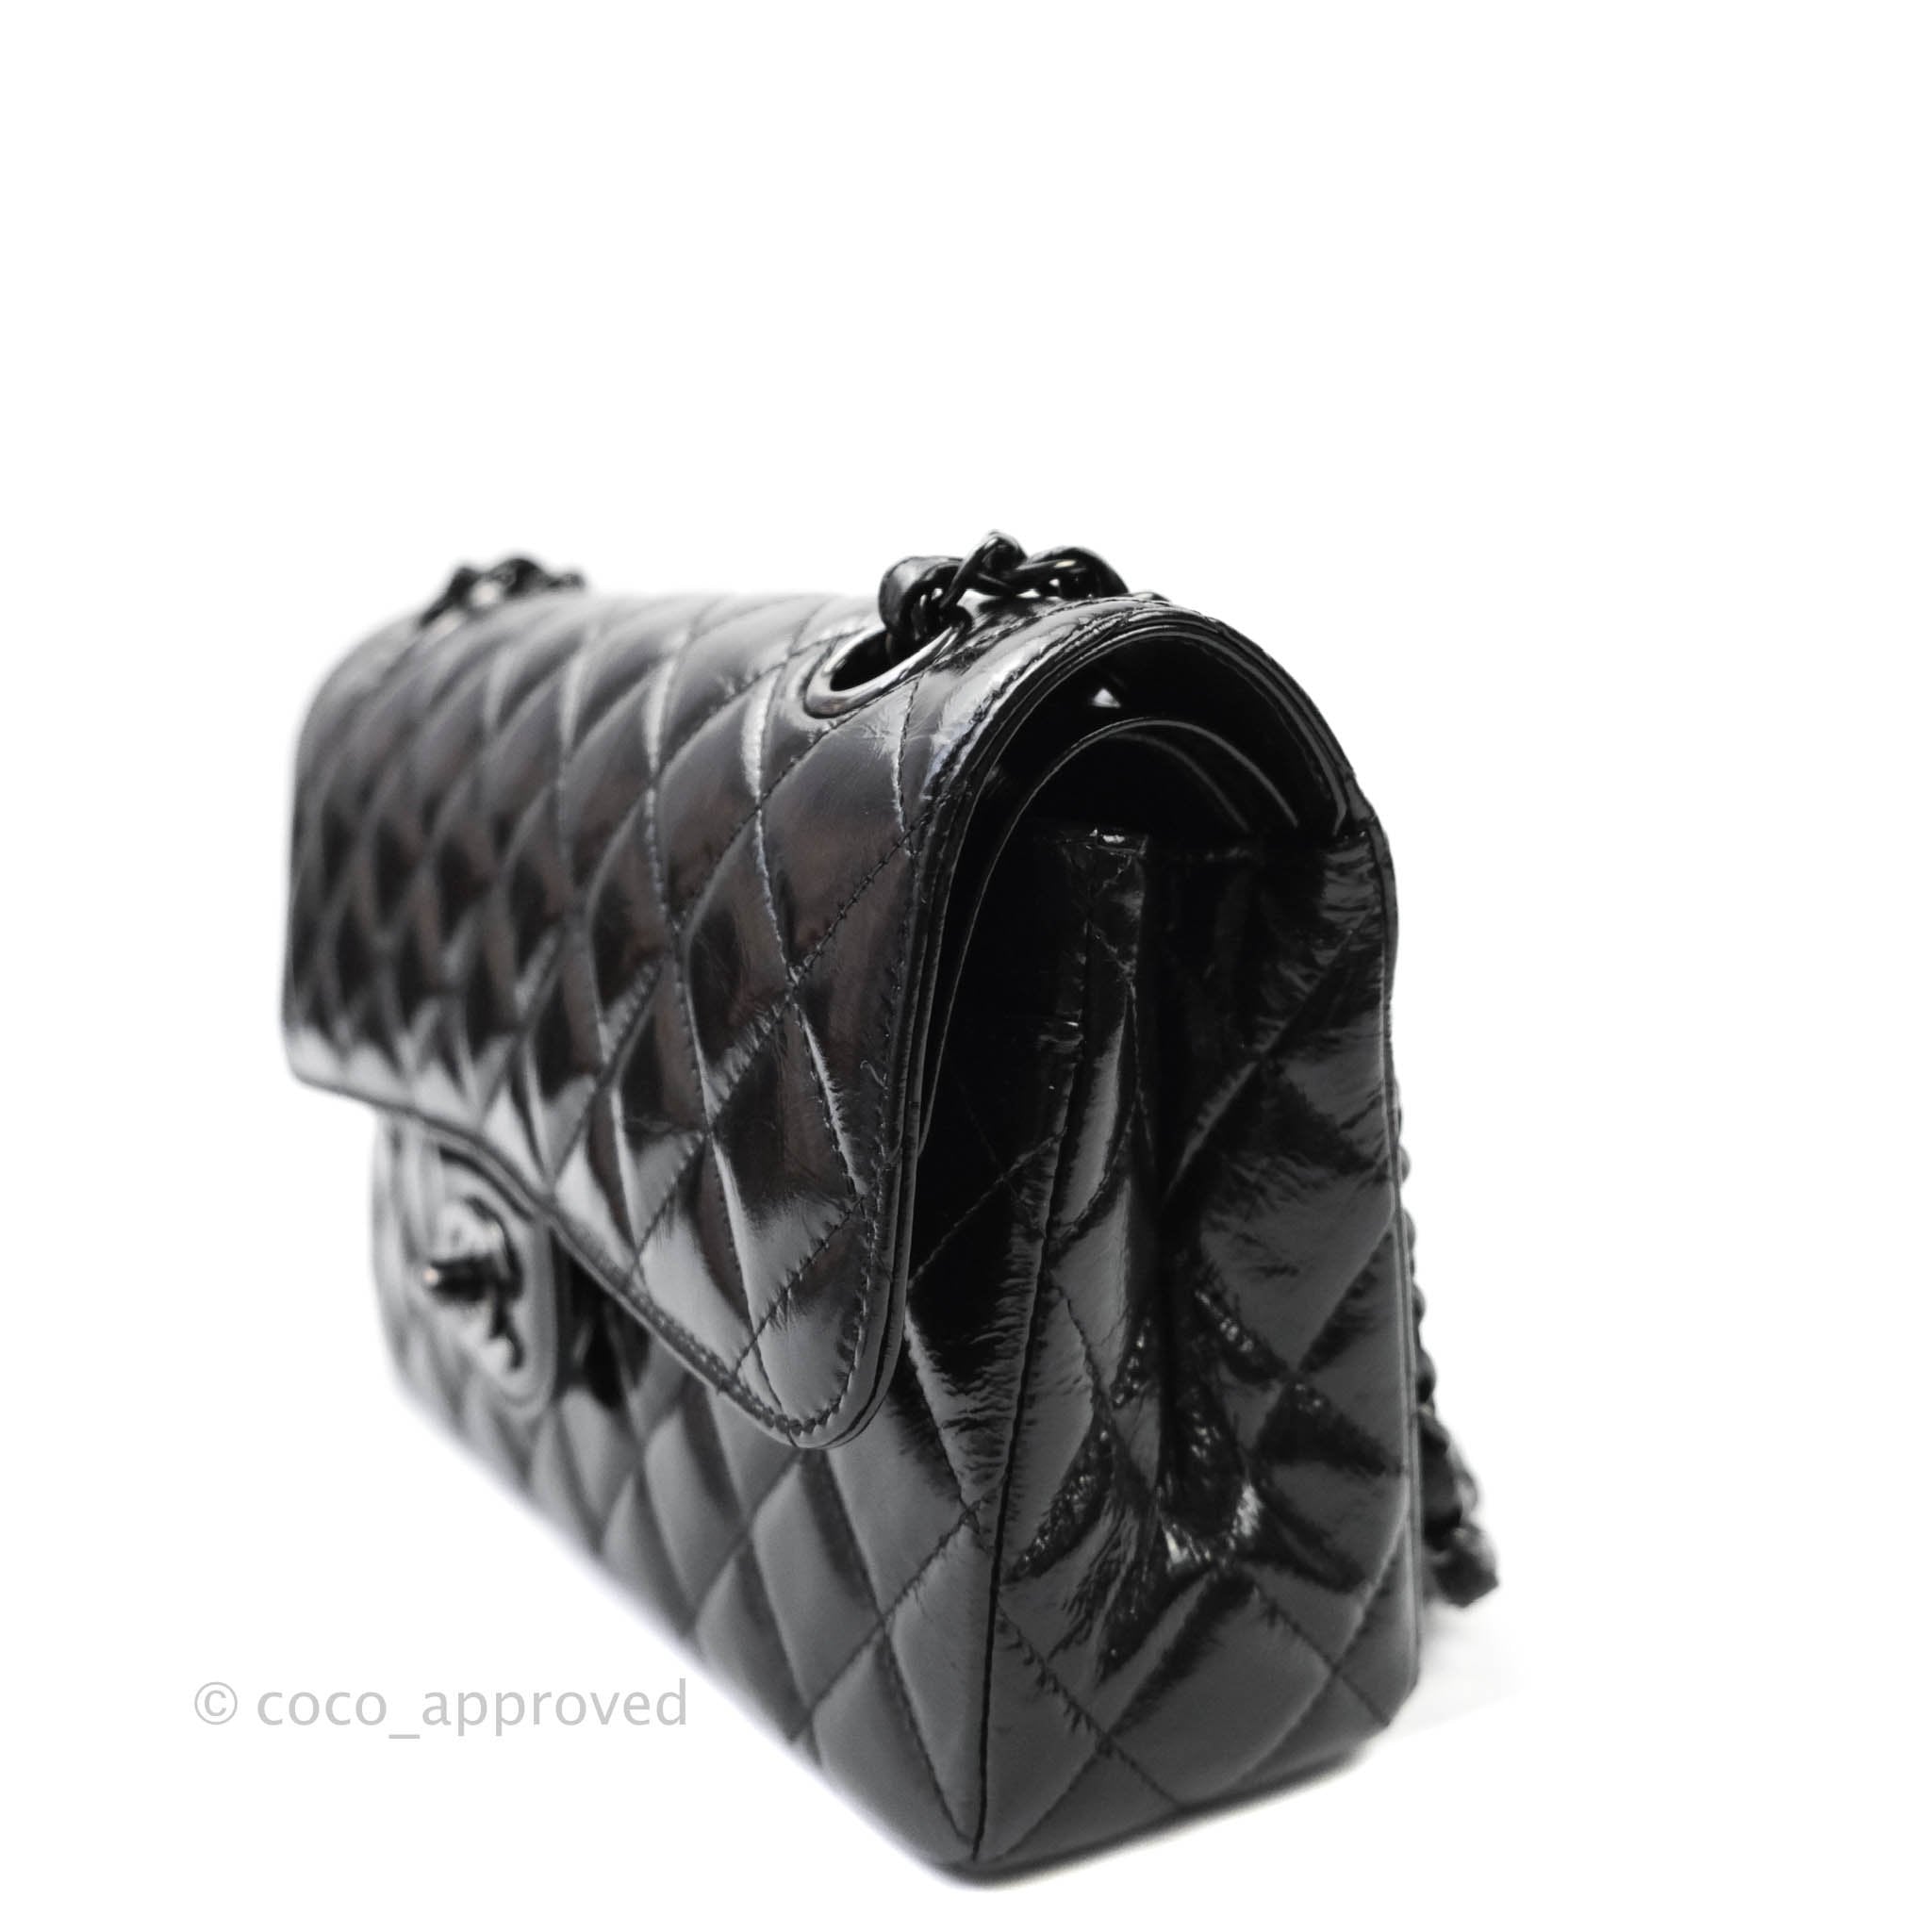 Chanel So Black Classic Double Flap Bag Quilted Shiny Crumpled